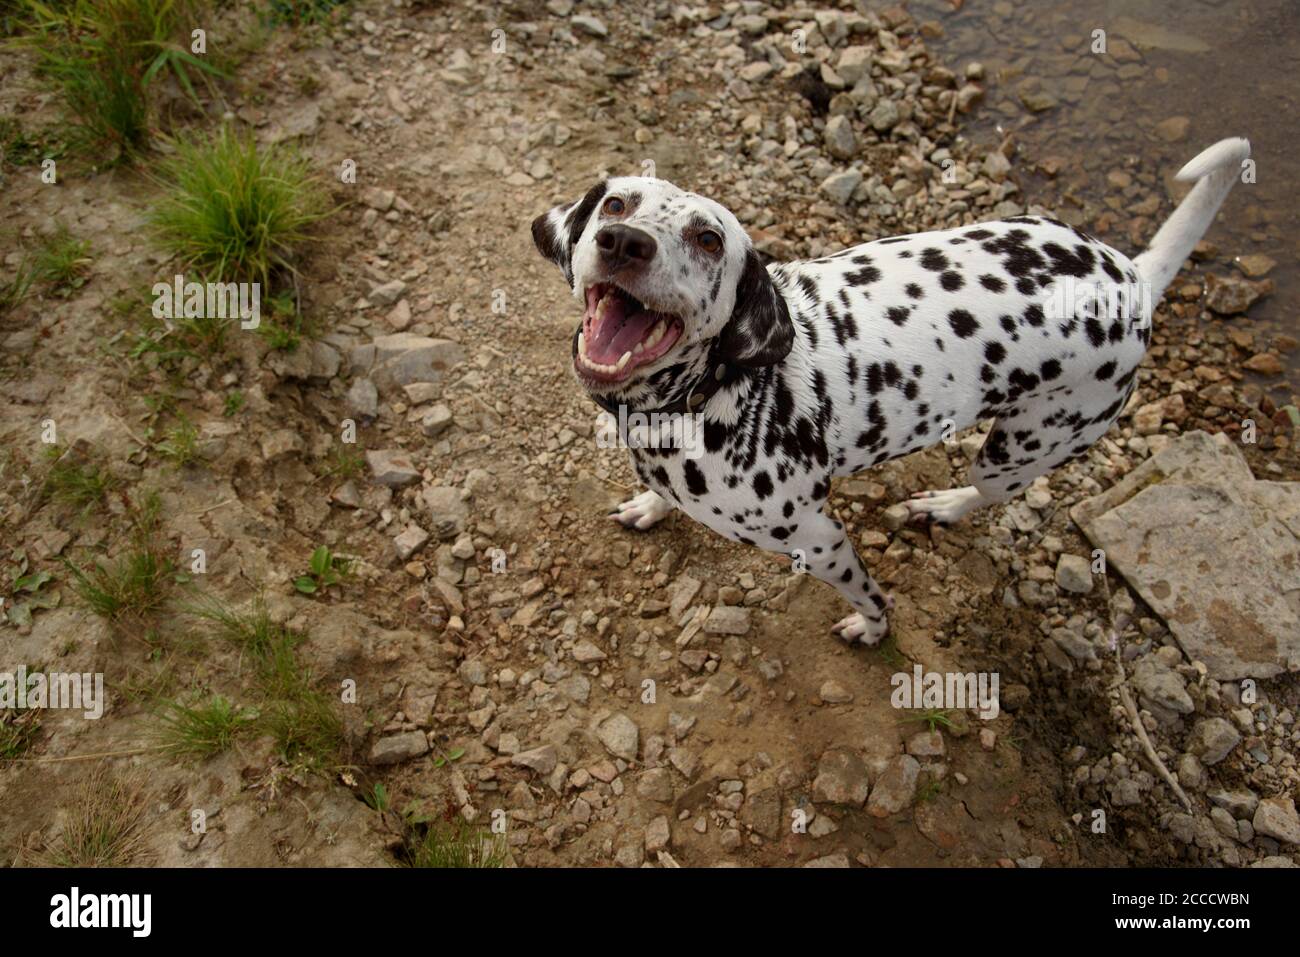 Happy dog on a walk looks at the owner. Stock Photo